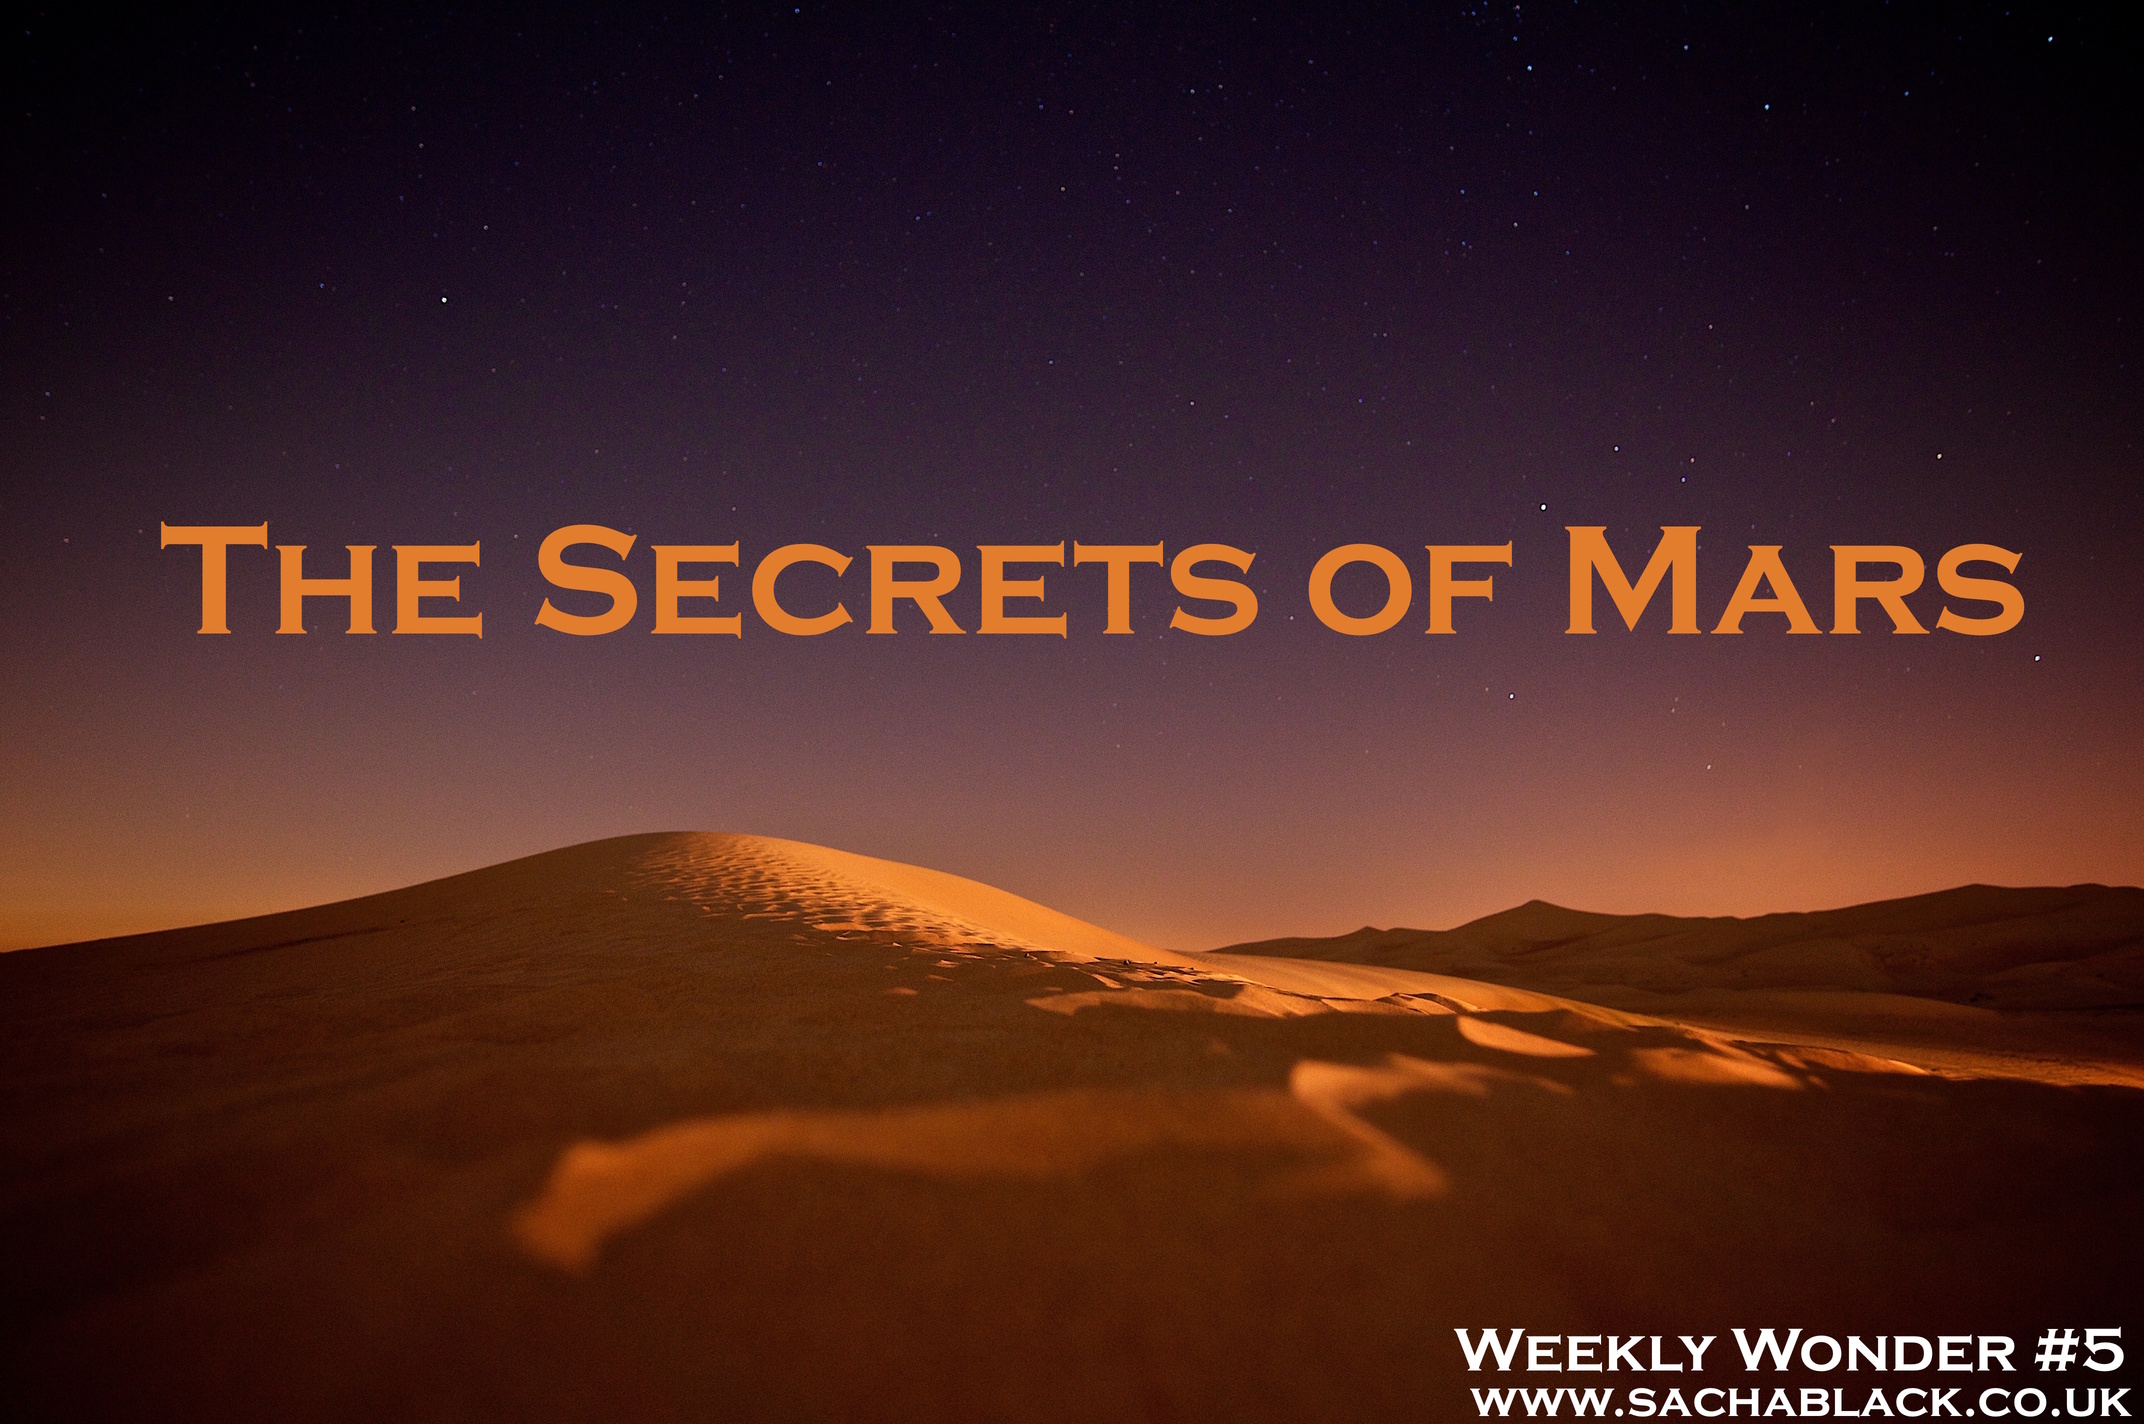 The Secrets of Mars Weekly Wonder #5 Inspiration for Writers